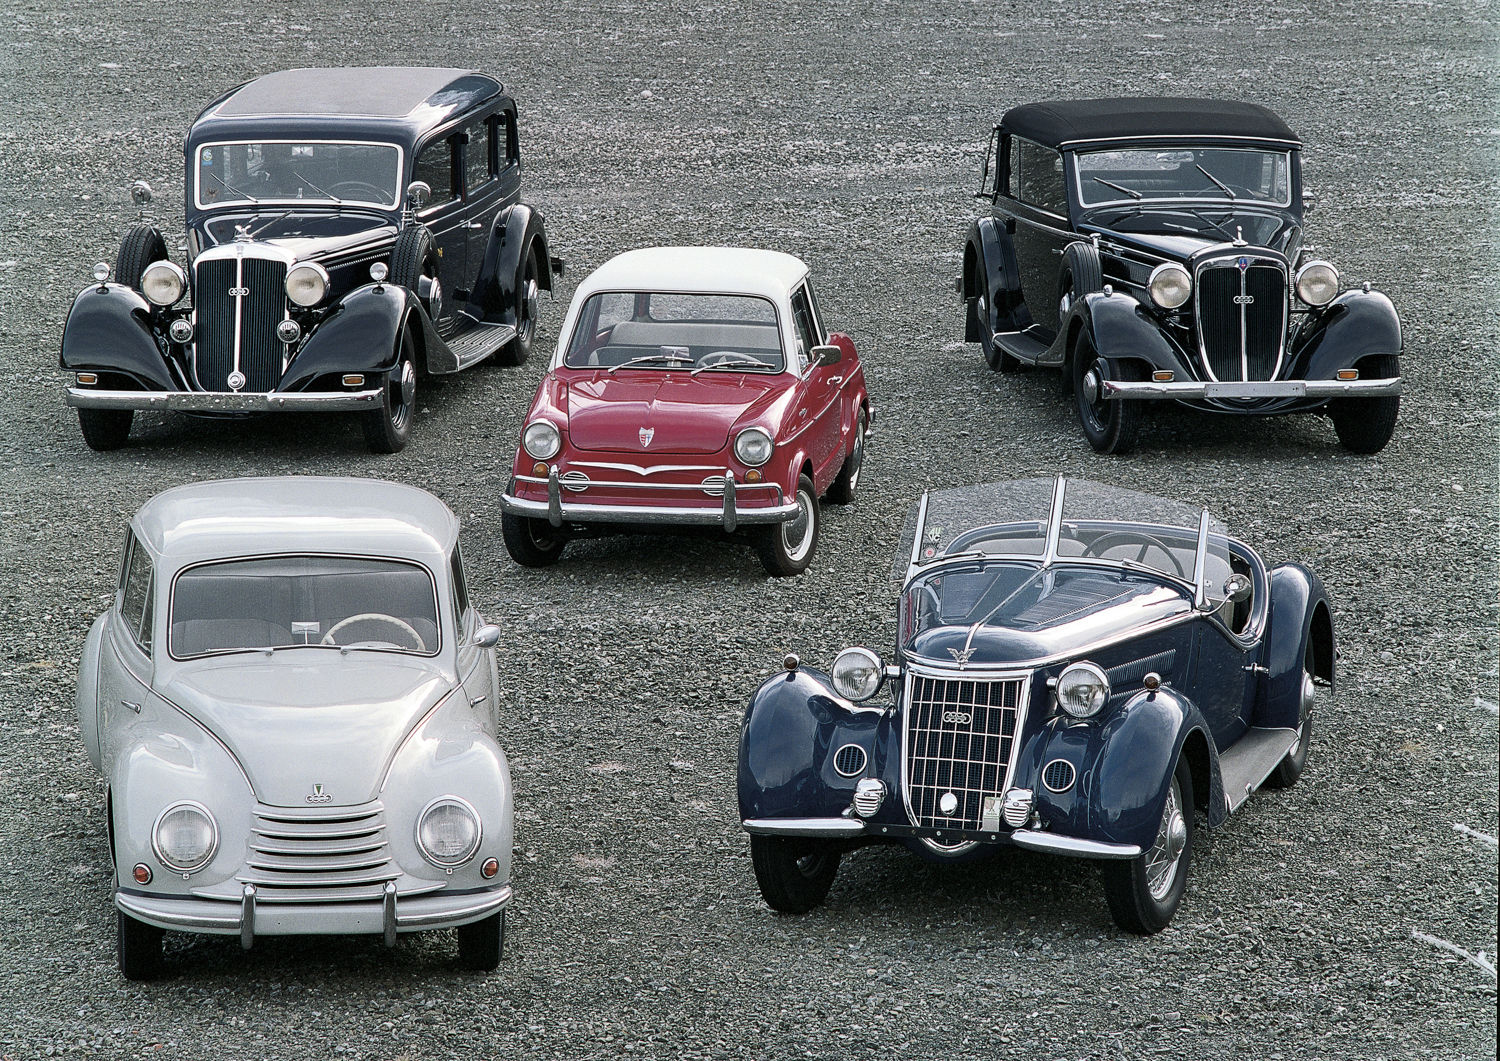 Audi history at a glance: Horch 830 BL,1938; DKW3=6F91, 1953; NSU Prinz 30, 1959; Wanderer W25K, 1937; Audi Front 225, 1936 (left to right). 